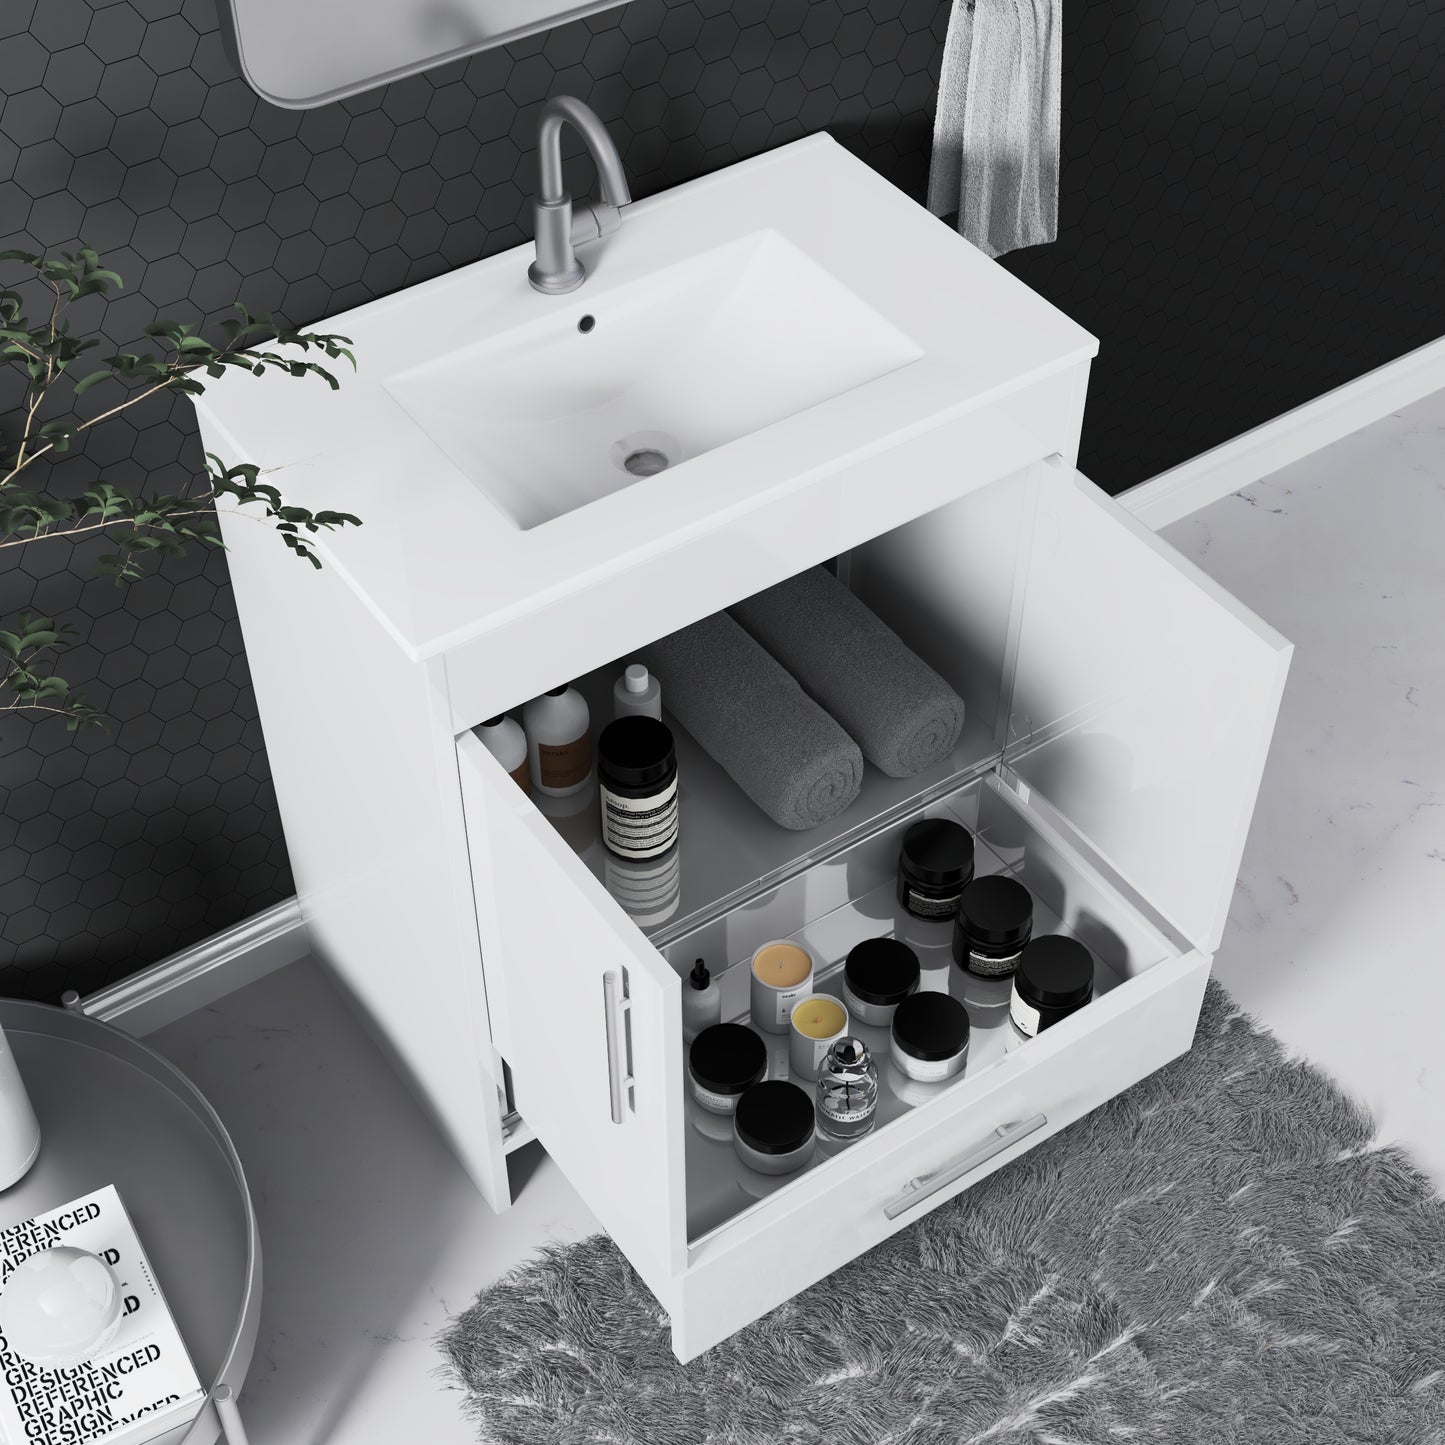 Pacific 32" Bathroom Vanity with Ceramic integrated counter top